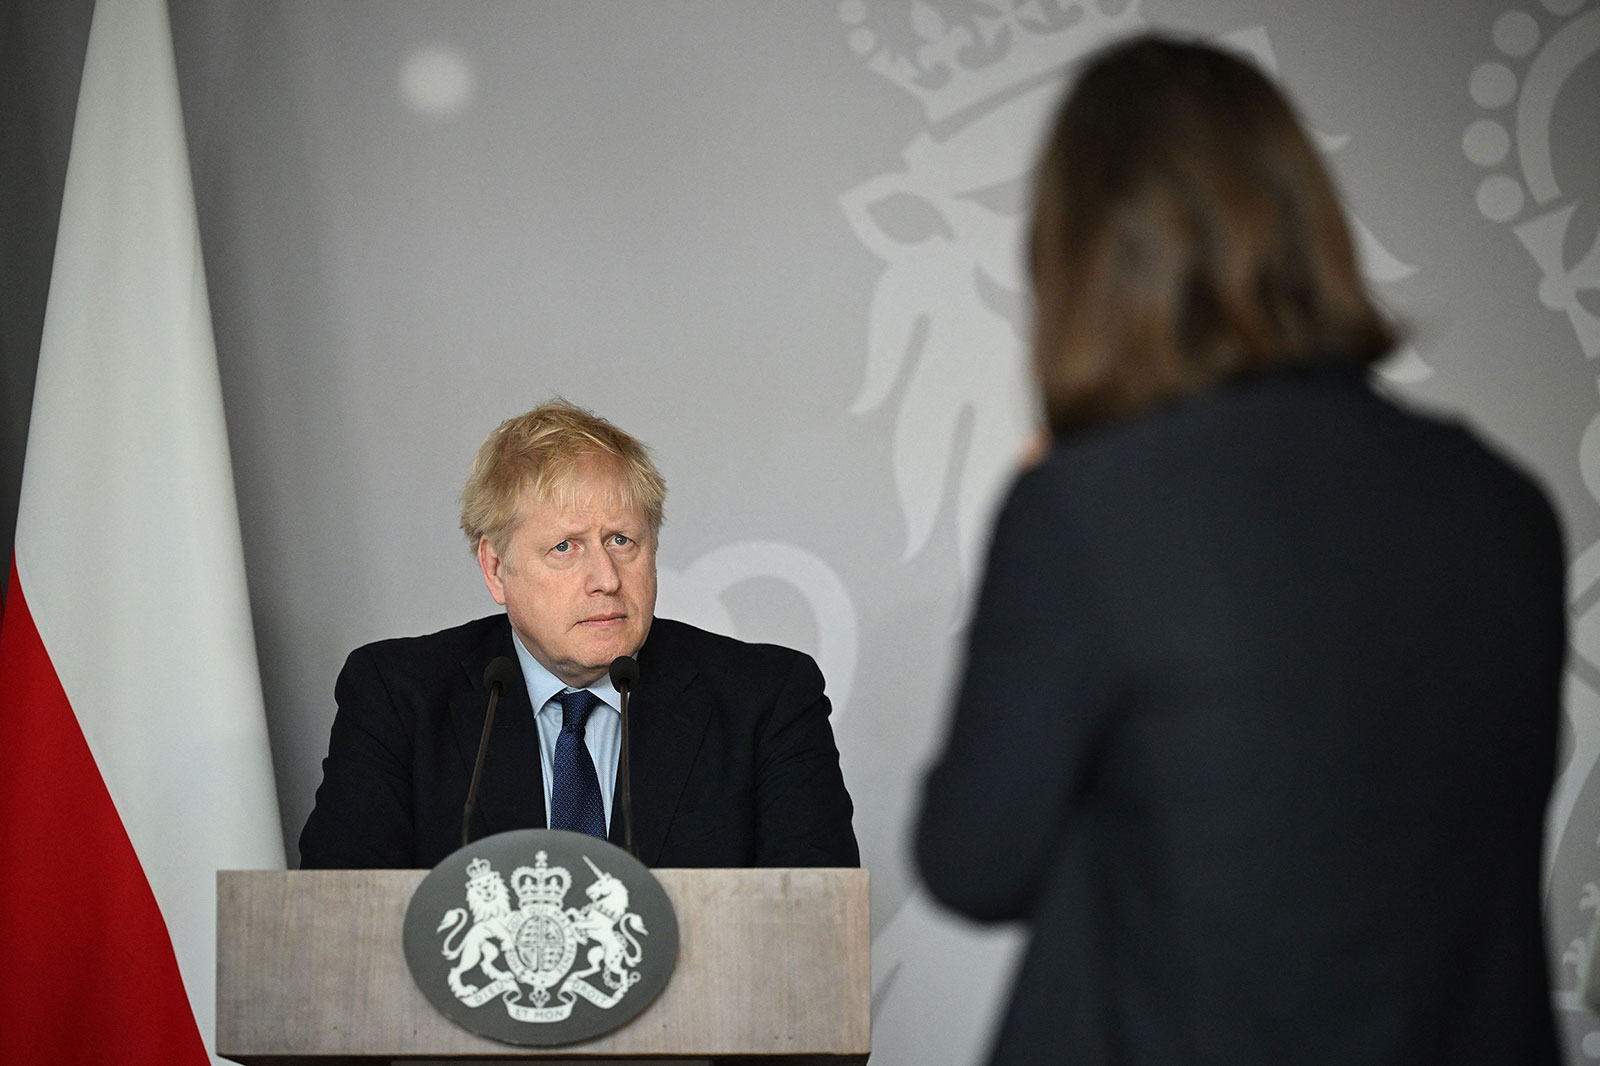 UK Prime Minister Boris Johnson takes questions during a press conference in Warsaw, Poland, on March 1.